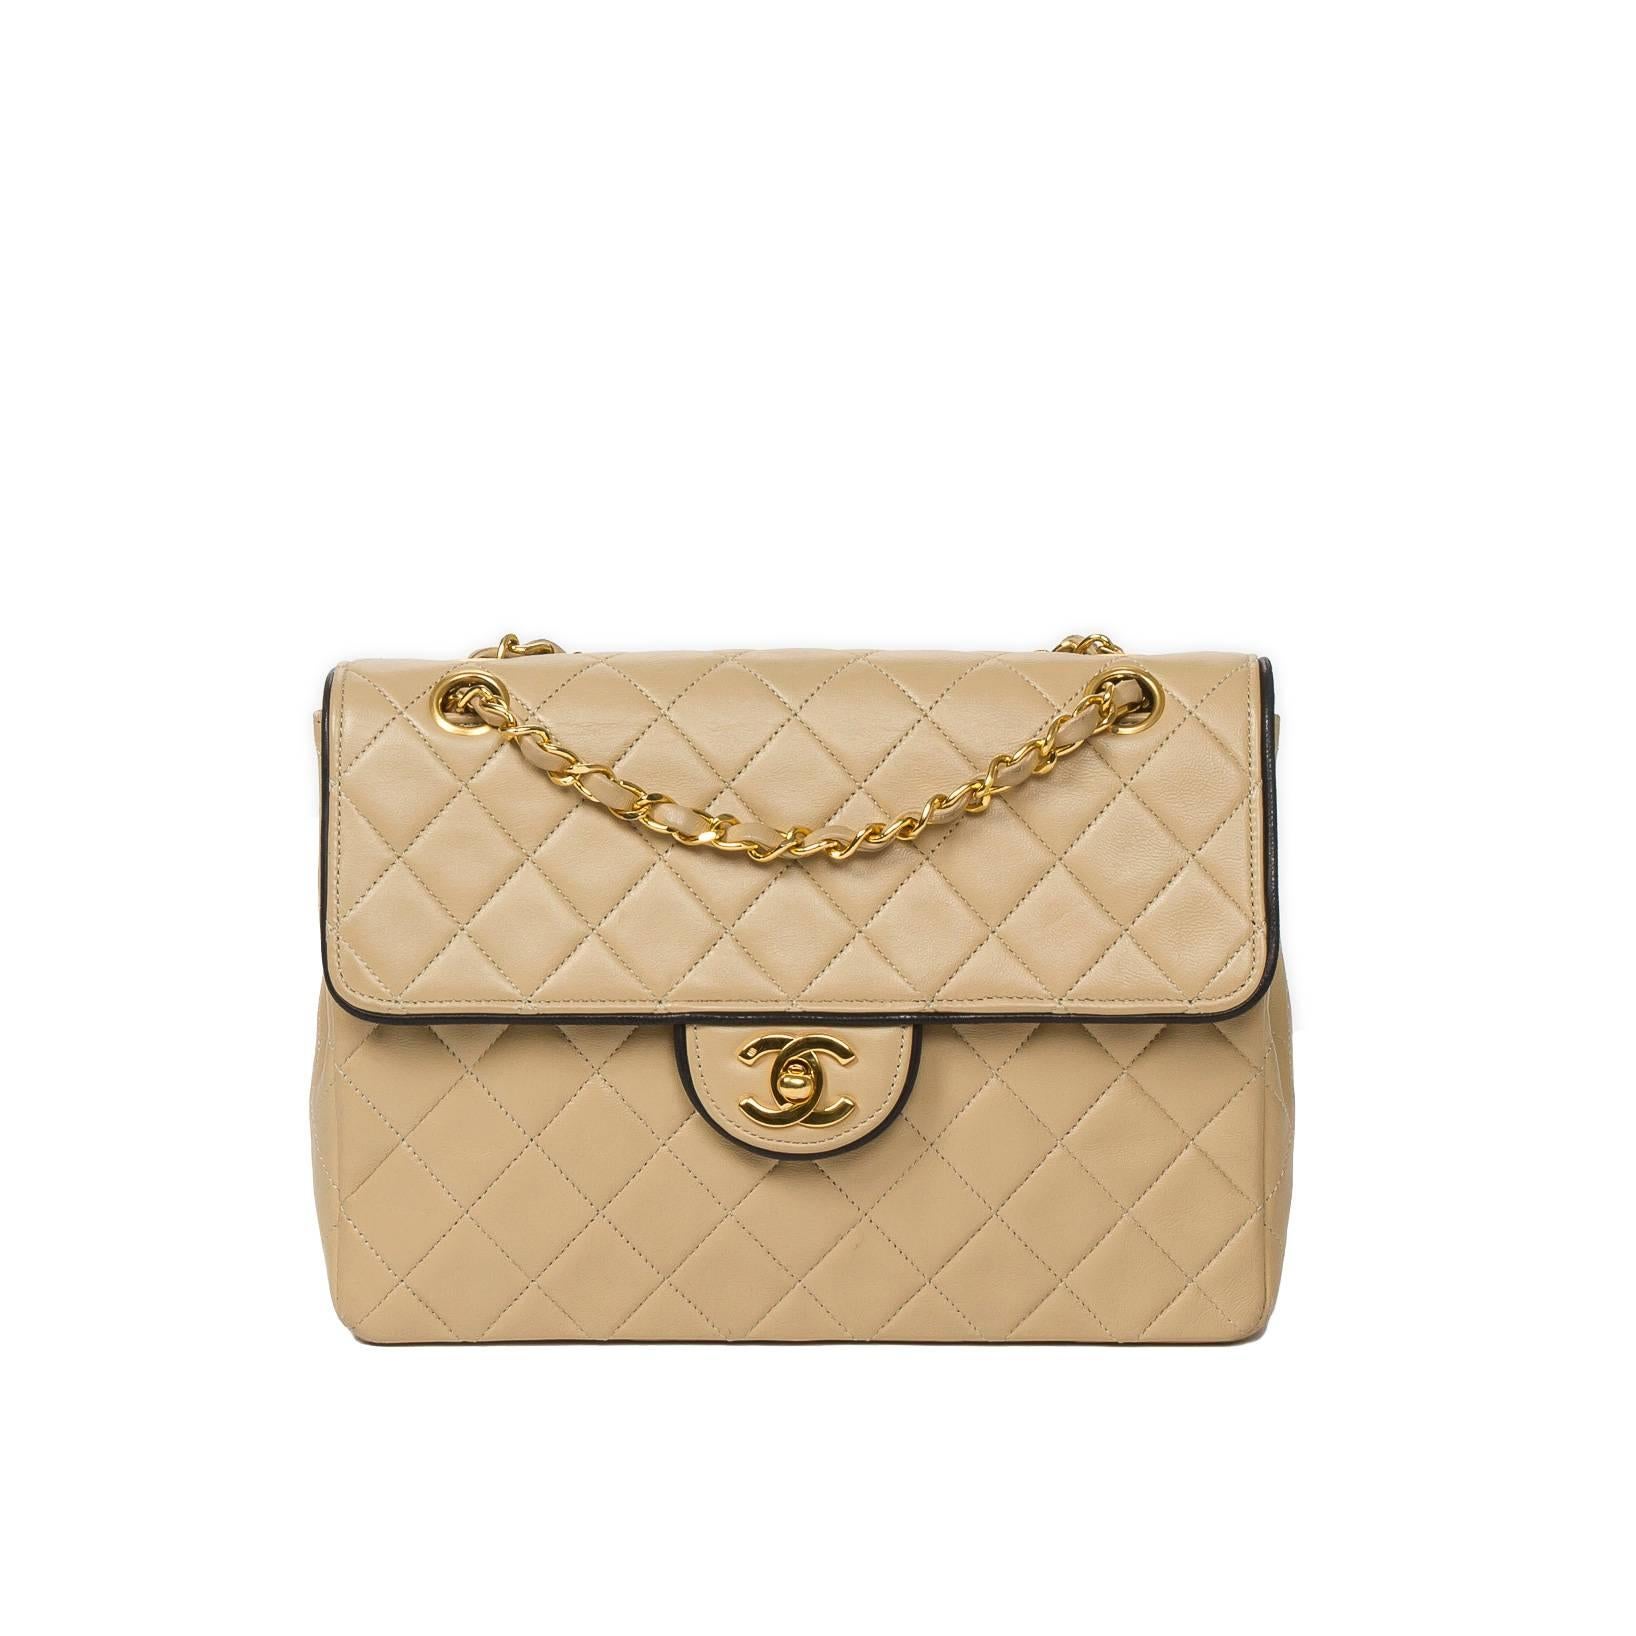 Chanel Vintage 24cm Single Flap Beige Quilted Leather